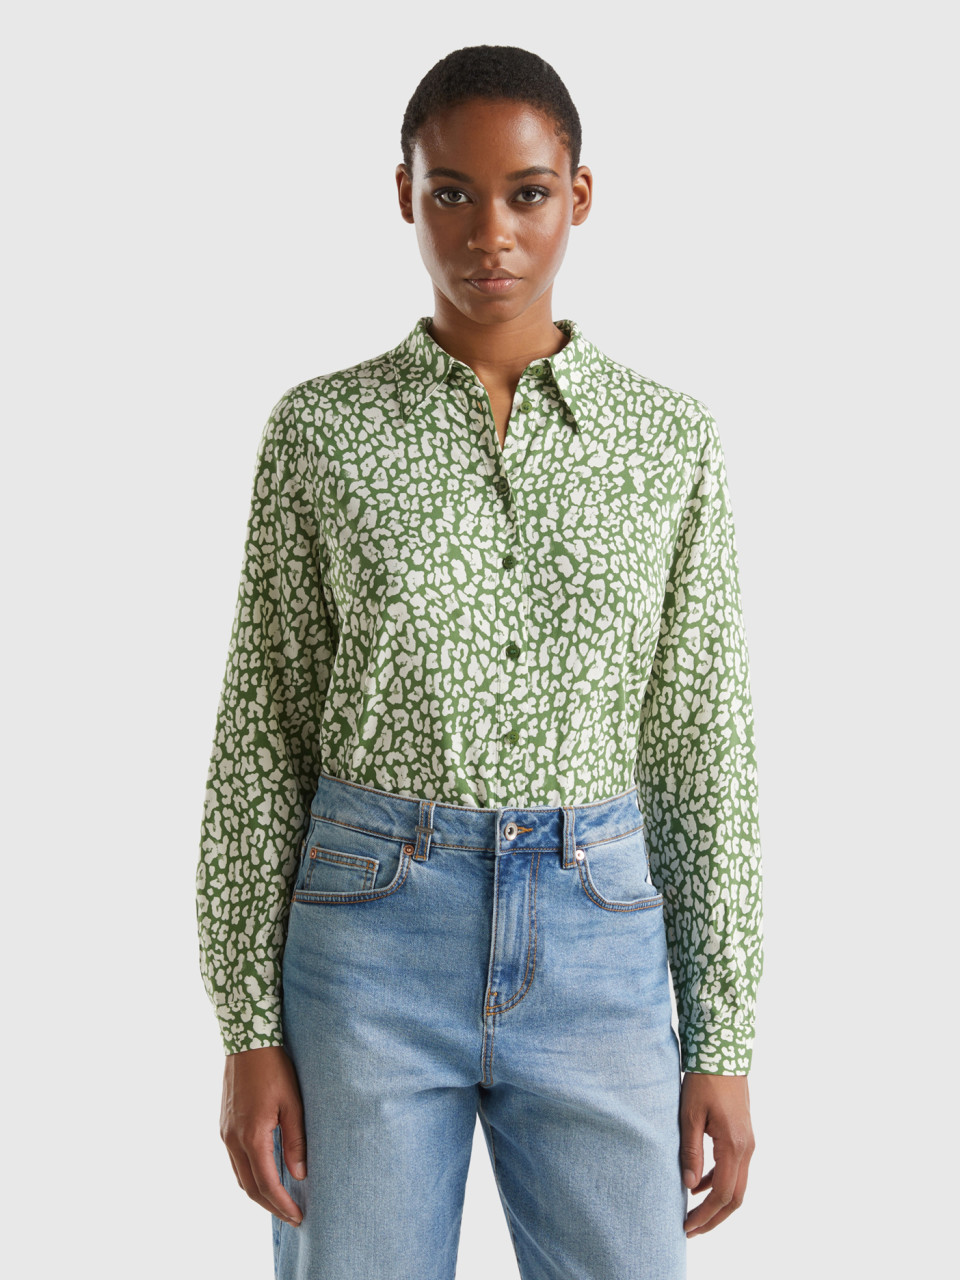 Benetton, Patterned Shirt In Sustainable Viscose, Multi-color, Women